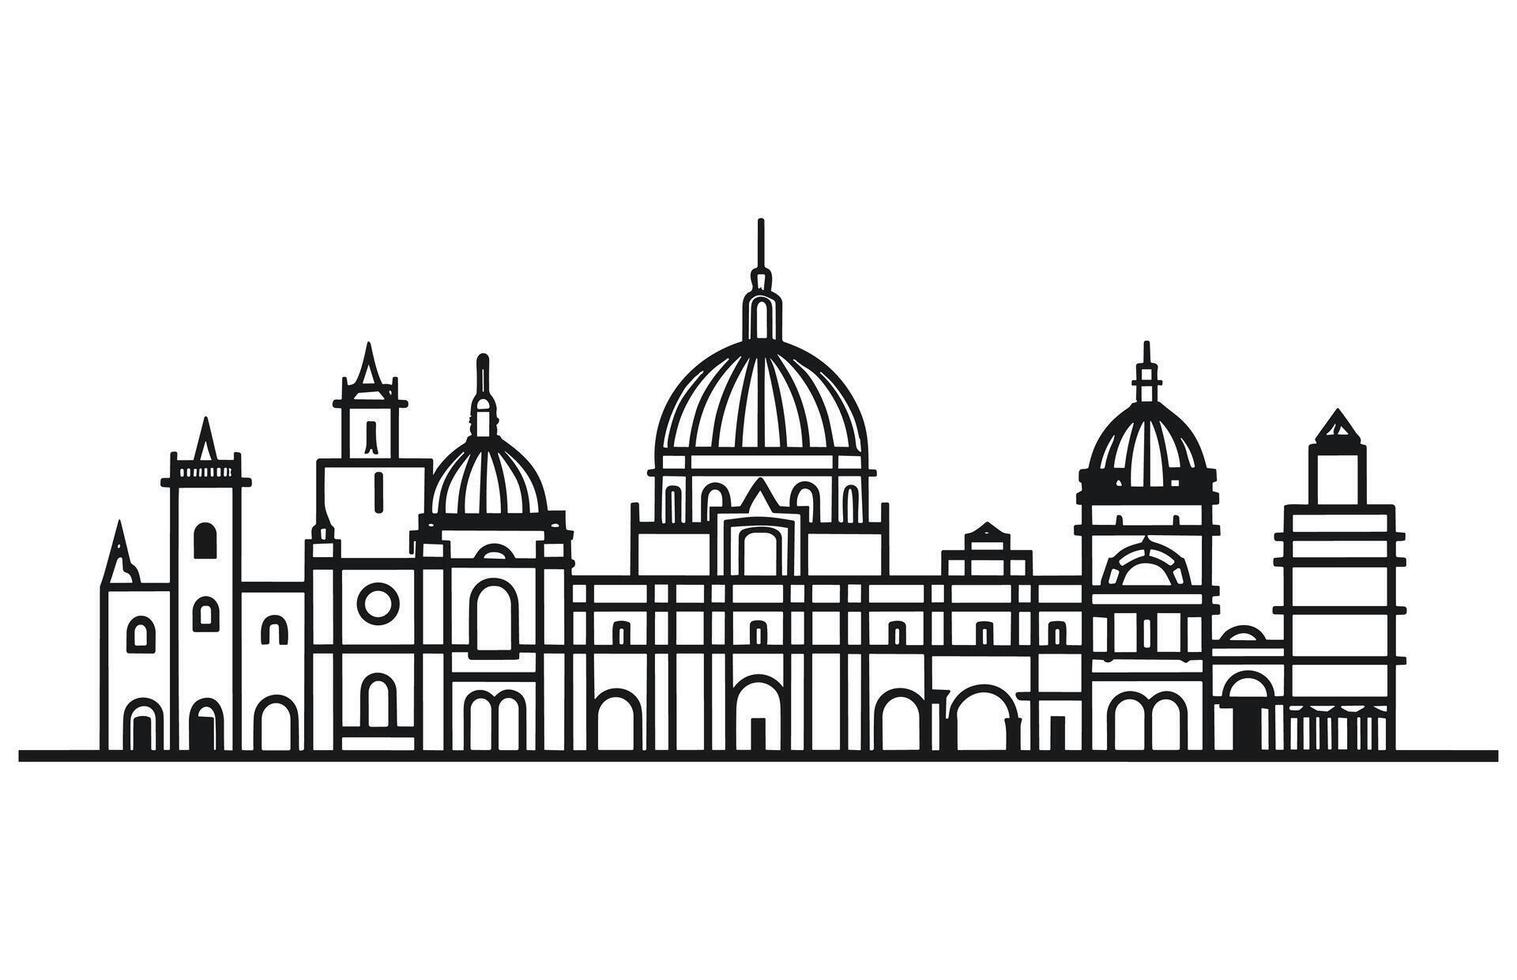 Mexico city skyline on a white background. Flat vector illustration, Mexico city line art. All buildings separated and customizable.